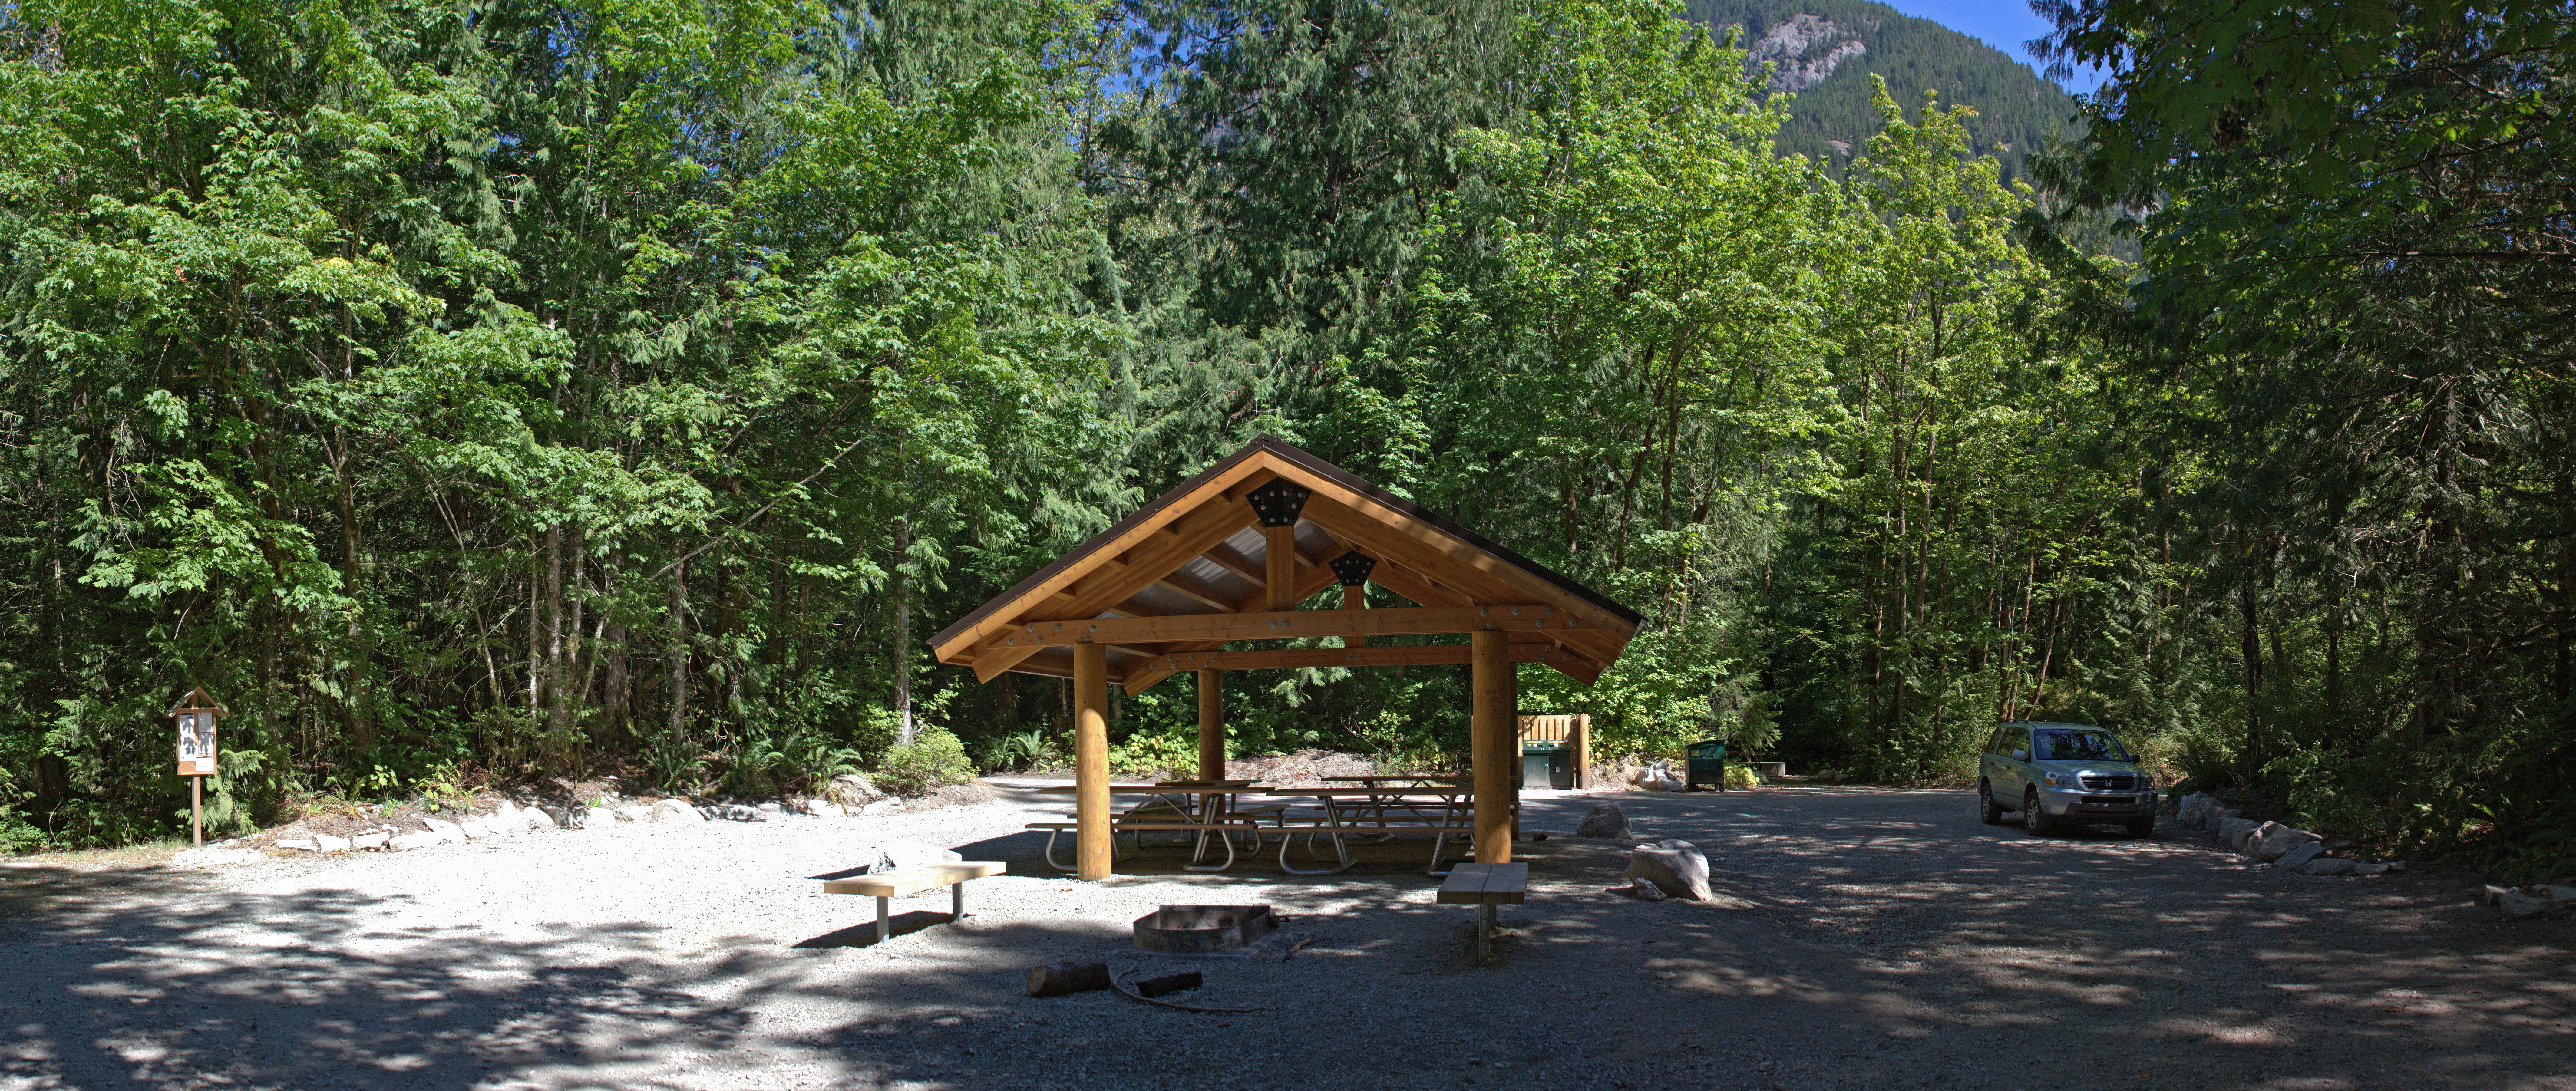 A sheltered picnic area in the forest